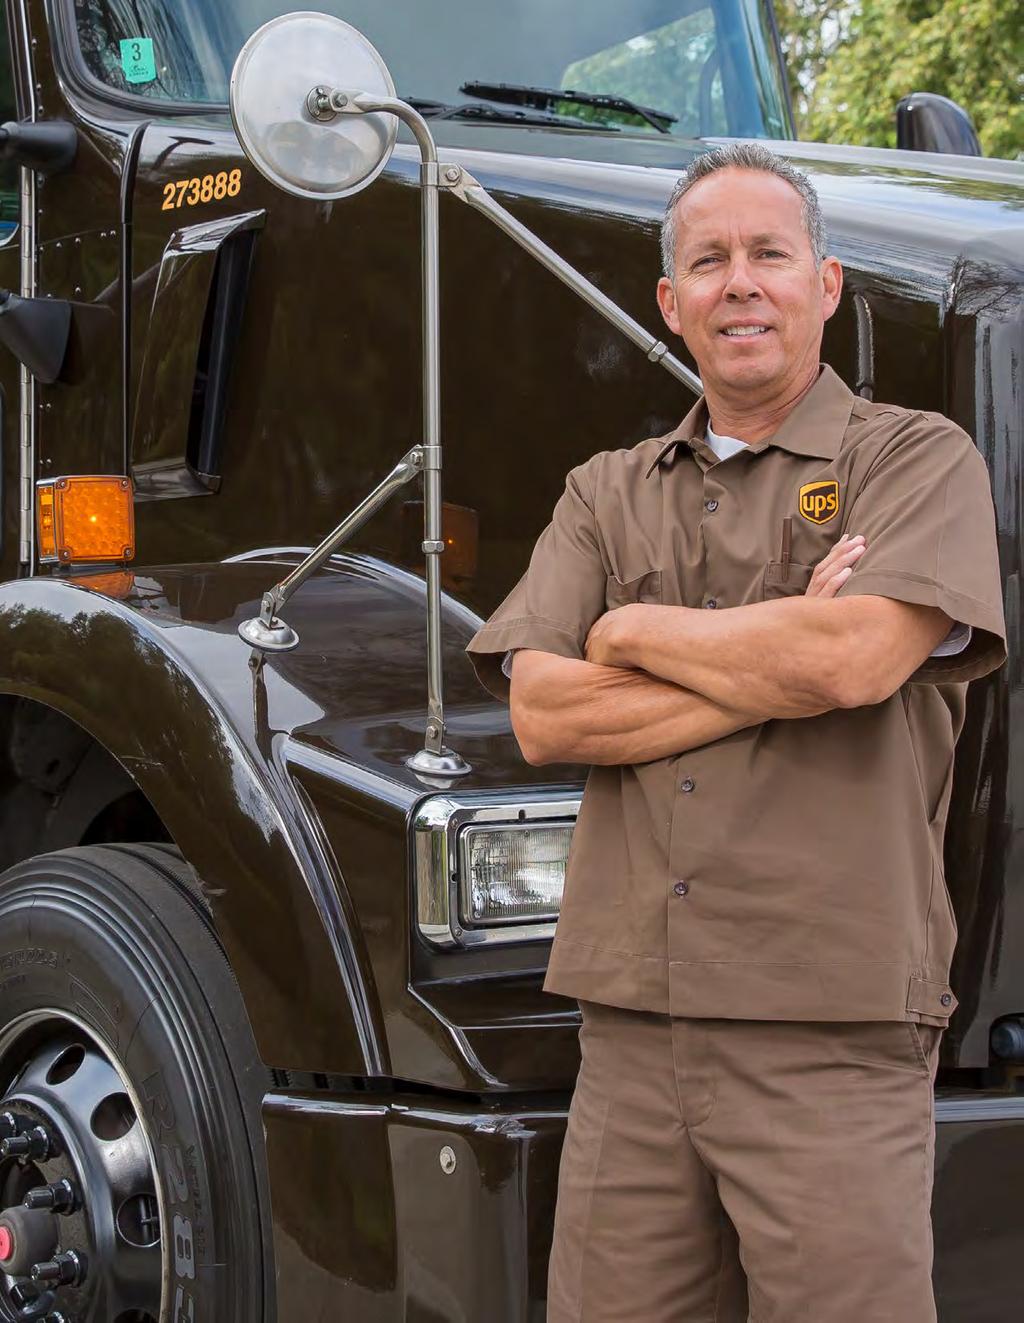 Environmental Responsibility COMMITTED TO MORE Mark Espinosa UPSer Mark Espinosa drives a Liquefied Natural Gas (LNG) vehicle on his daily Southern California route, playing an important role in the